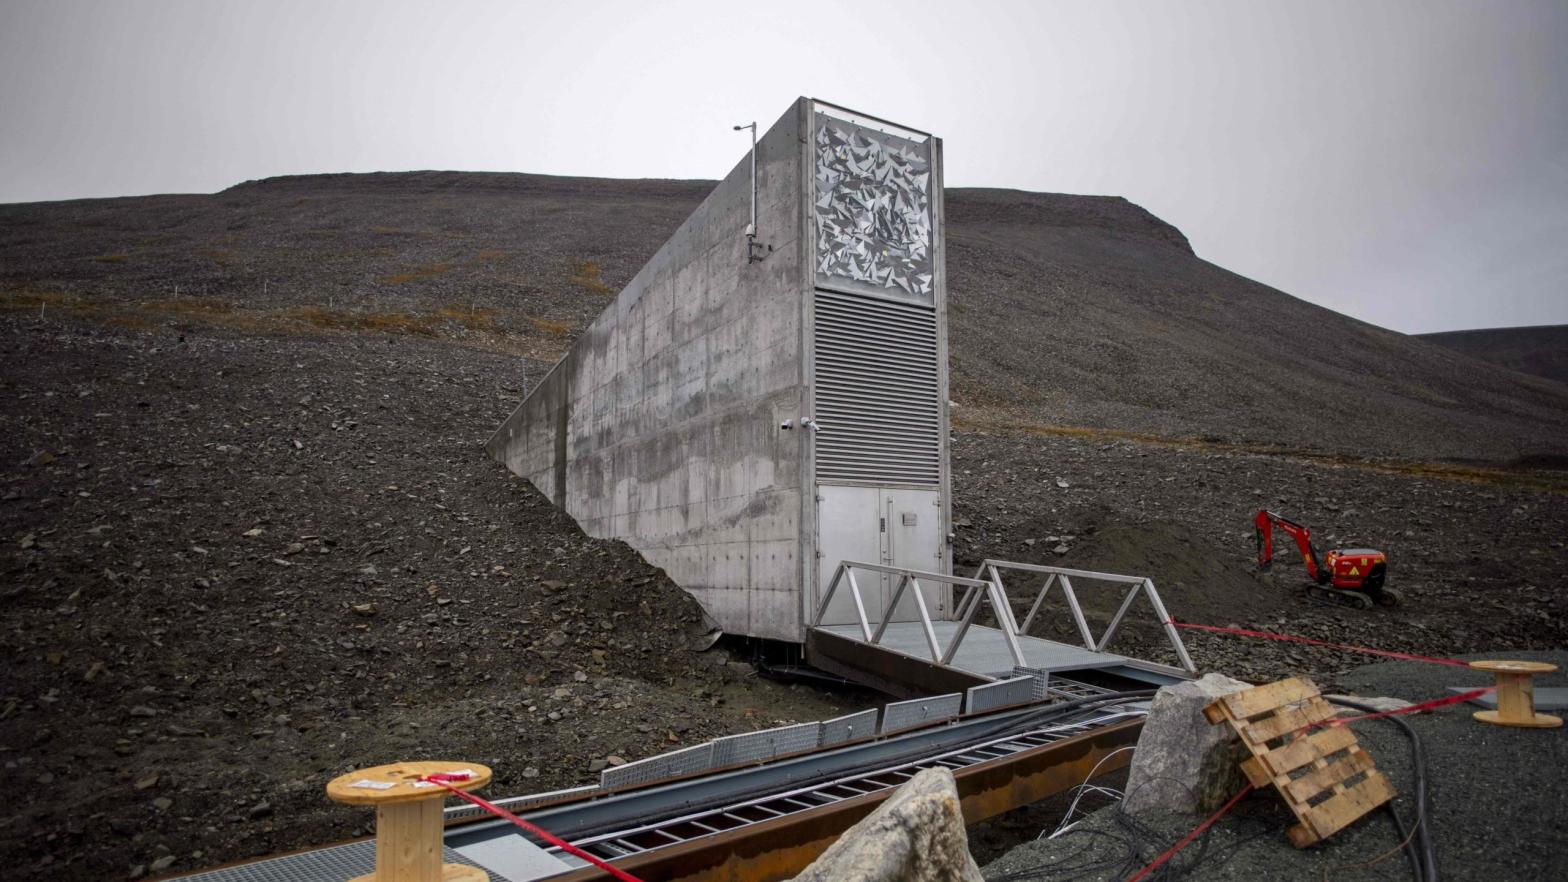 The entrance to the Svalbard Global Seed Vault on Spitsbergen in September 2021. (Photo: OLIVIER MORIN/AFP, Getty Images)